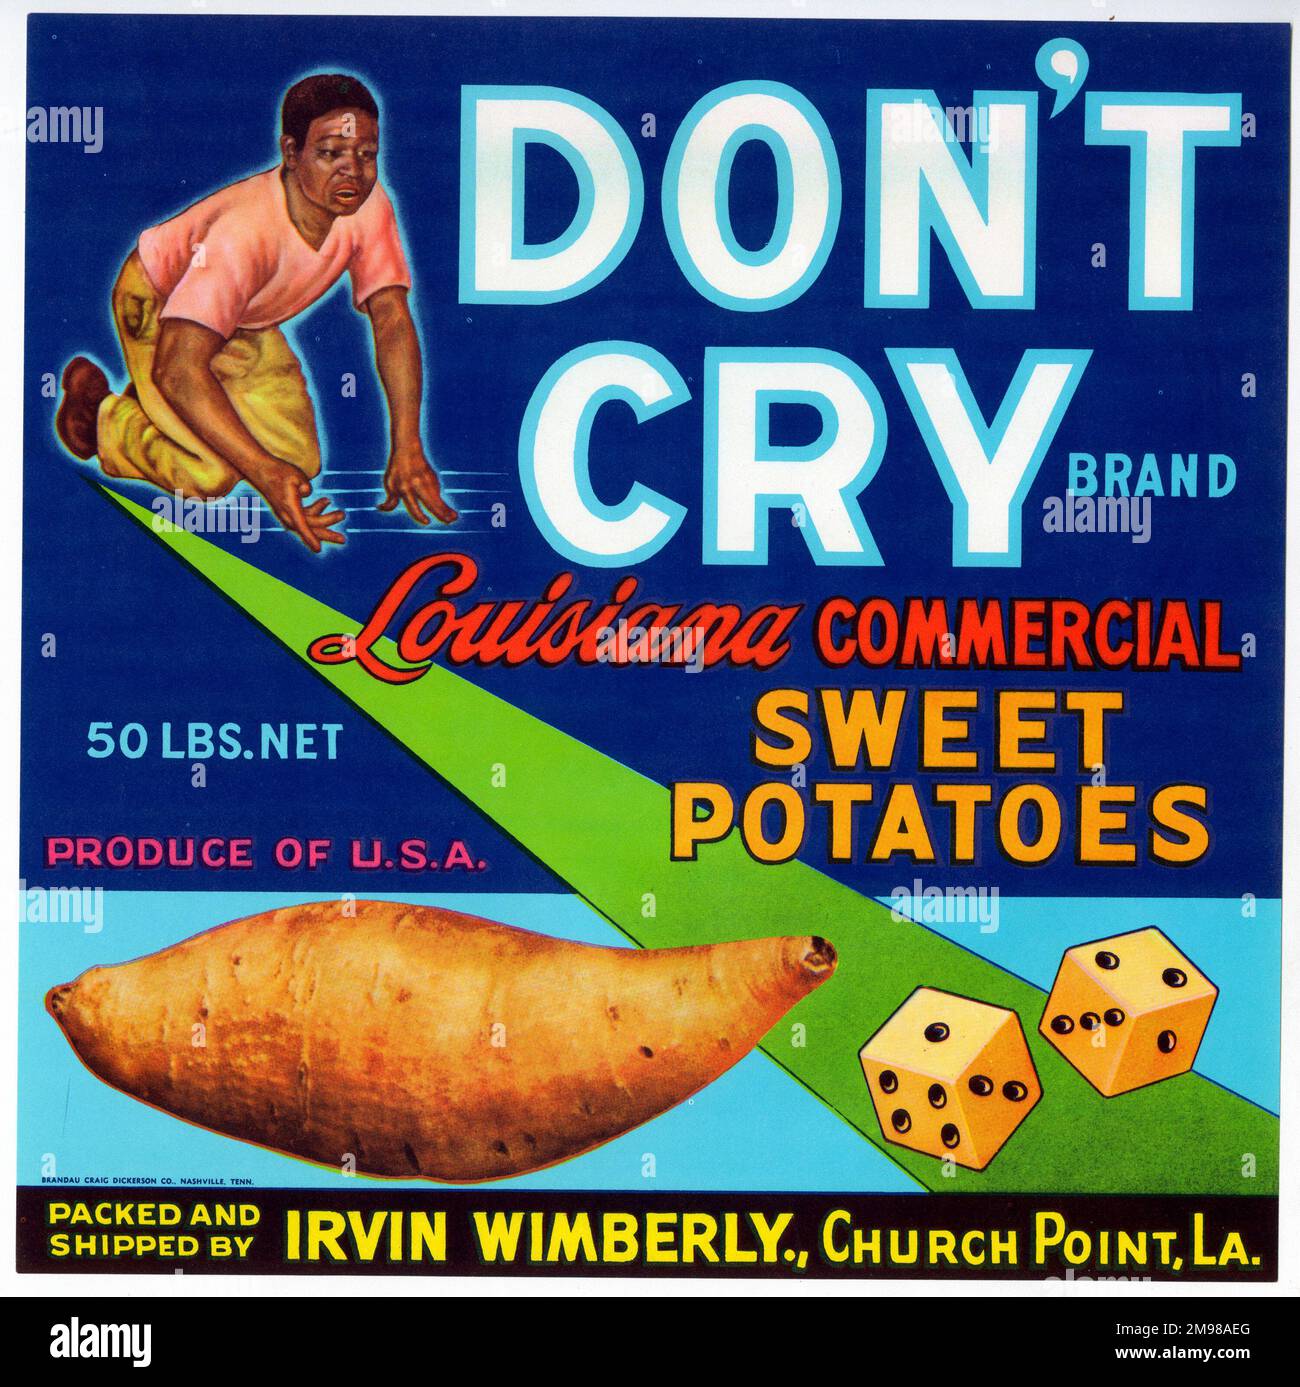 Label design, Don't Cry Louisiana Commercial Sweet Potatoes. Stock Photo